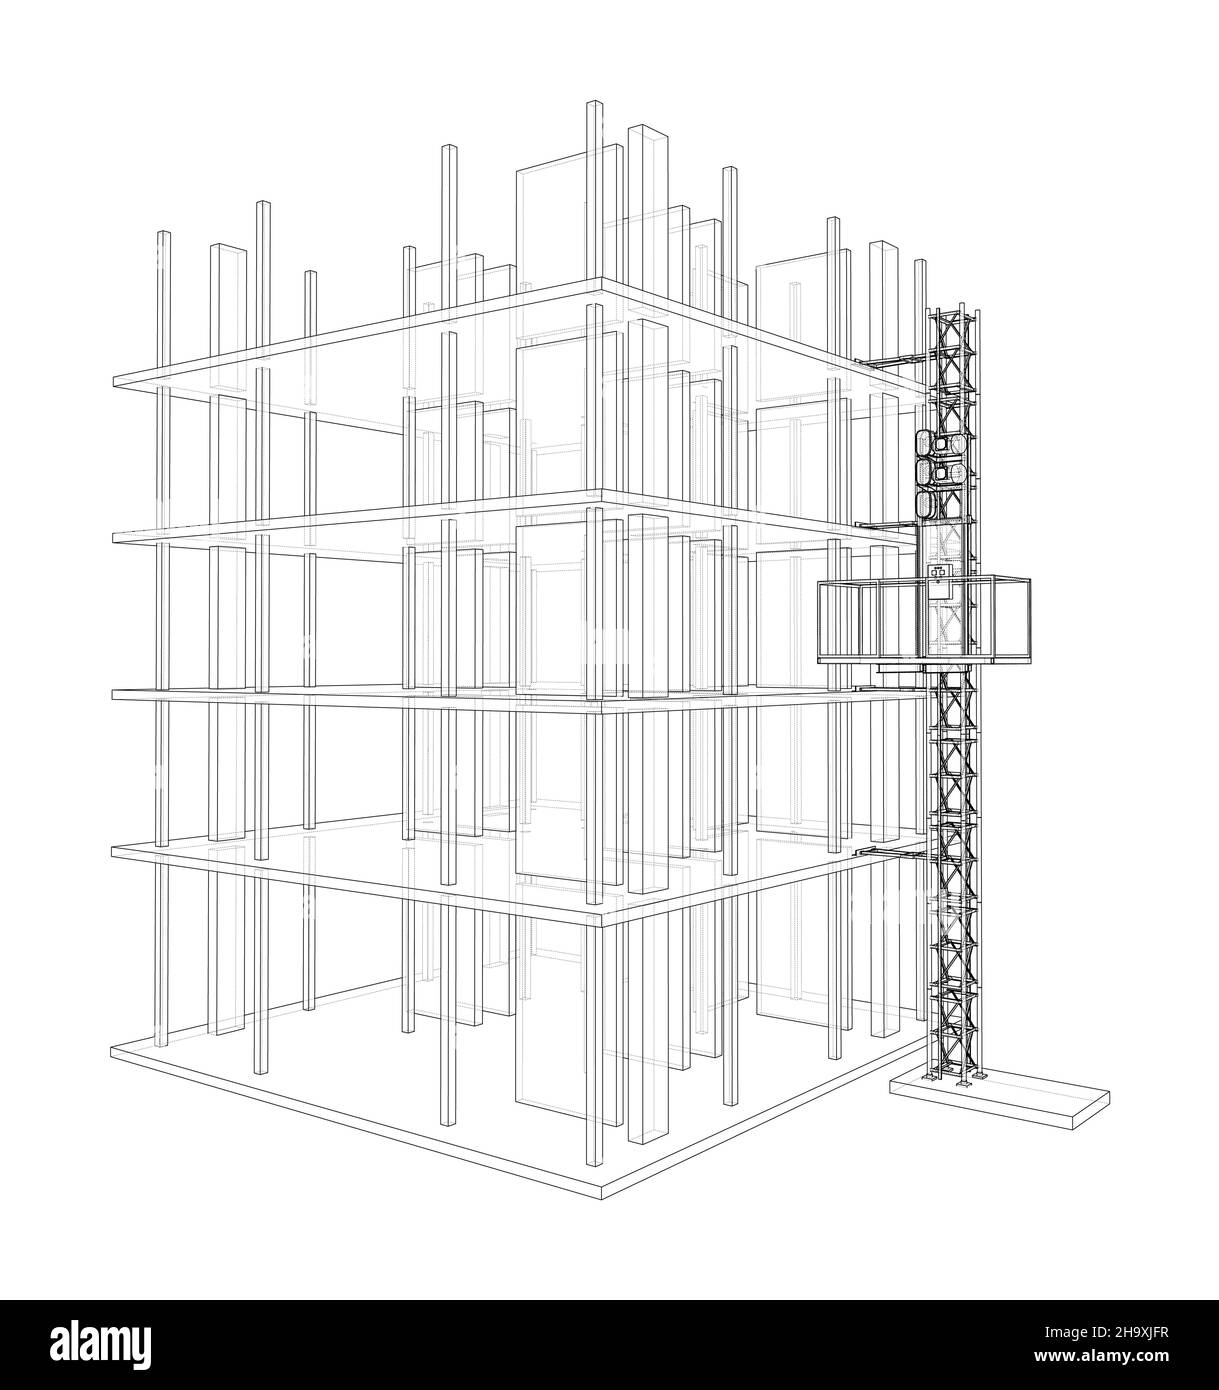 Building under construction with mast lifts Stock Photo